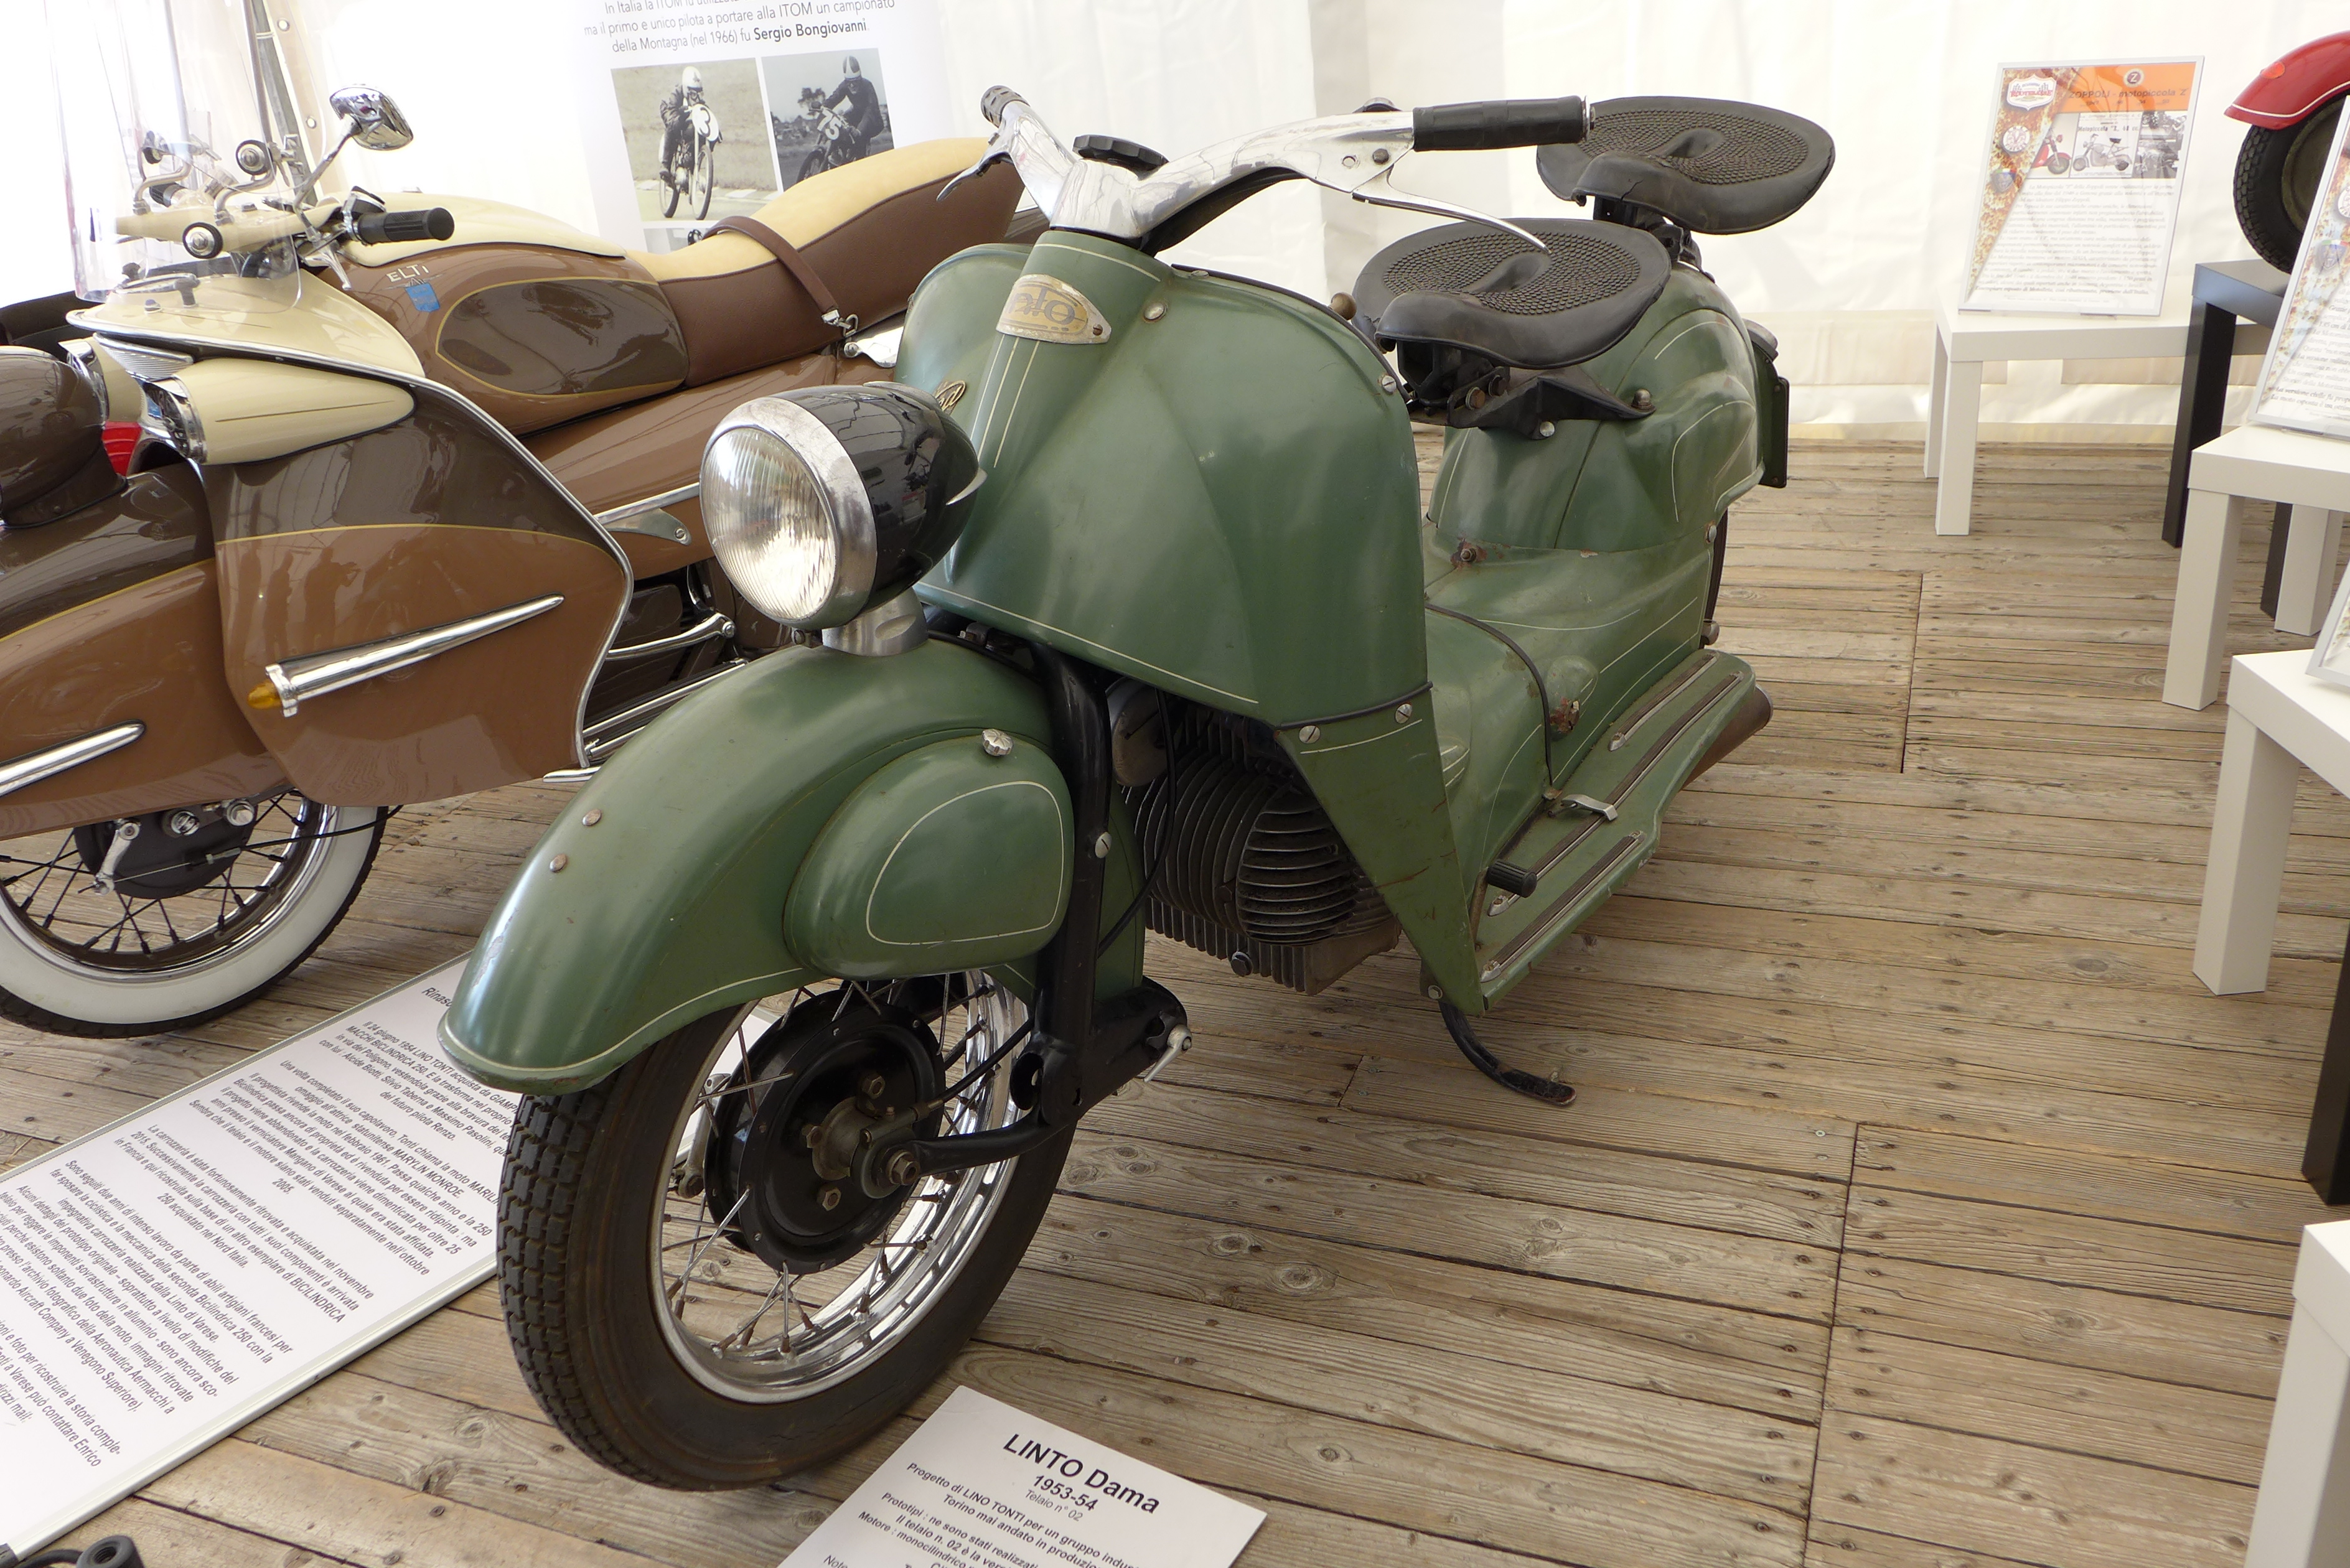 Motorcycle Simson S51 Restauriert from Austria, 3990 EUR for sale